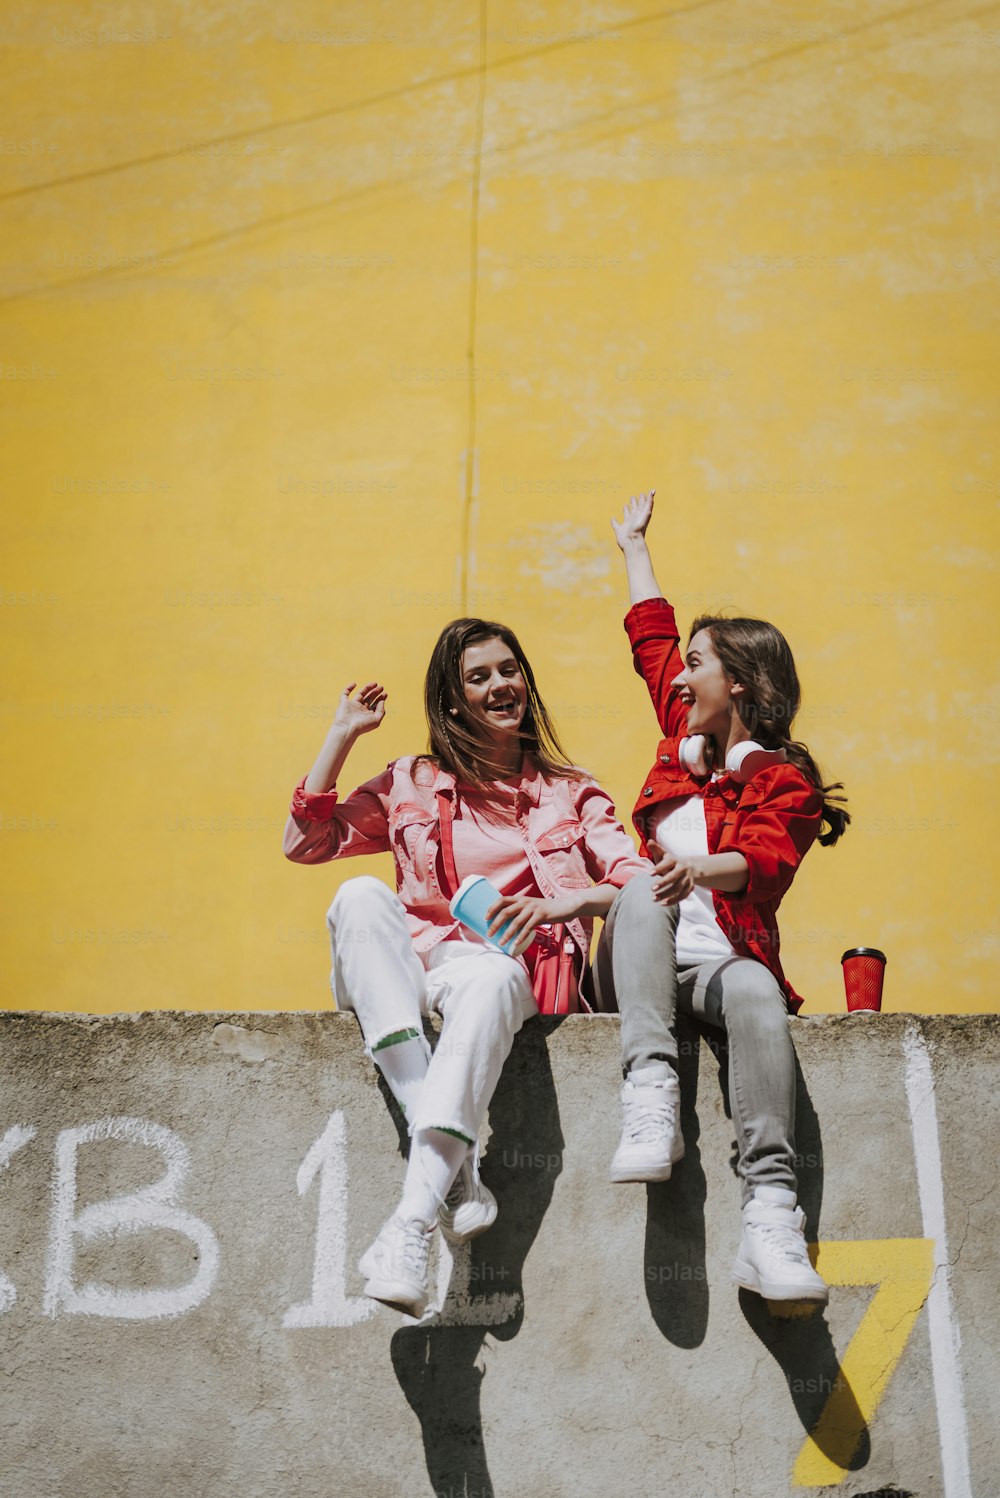 Urban lifestyle concept. Full length portrait of two happy young hipster ladies having fun together on parapet with cup of coffee